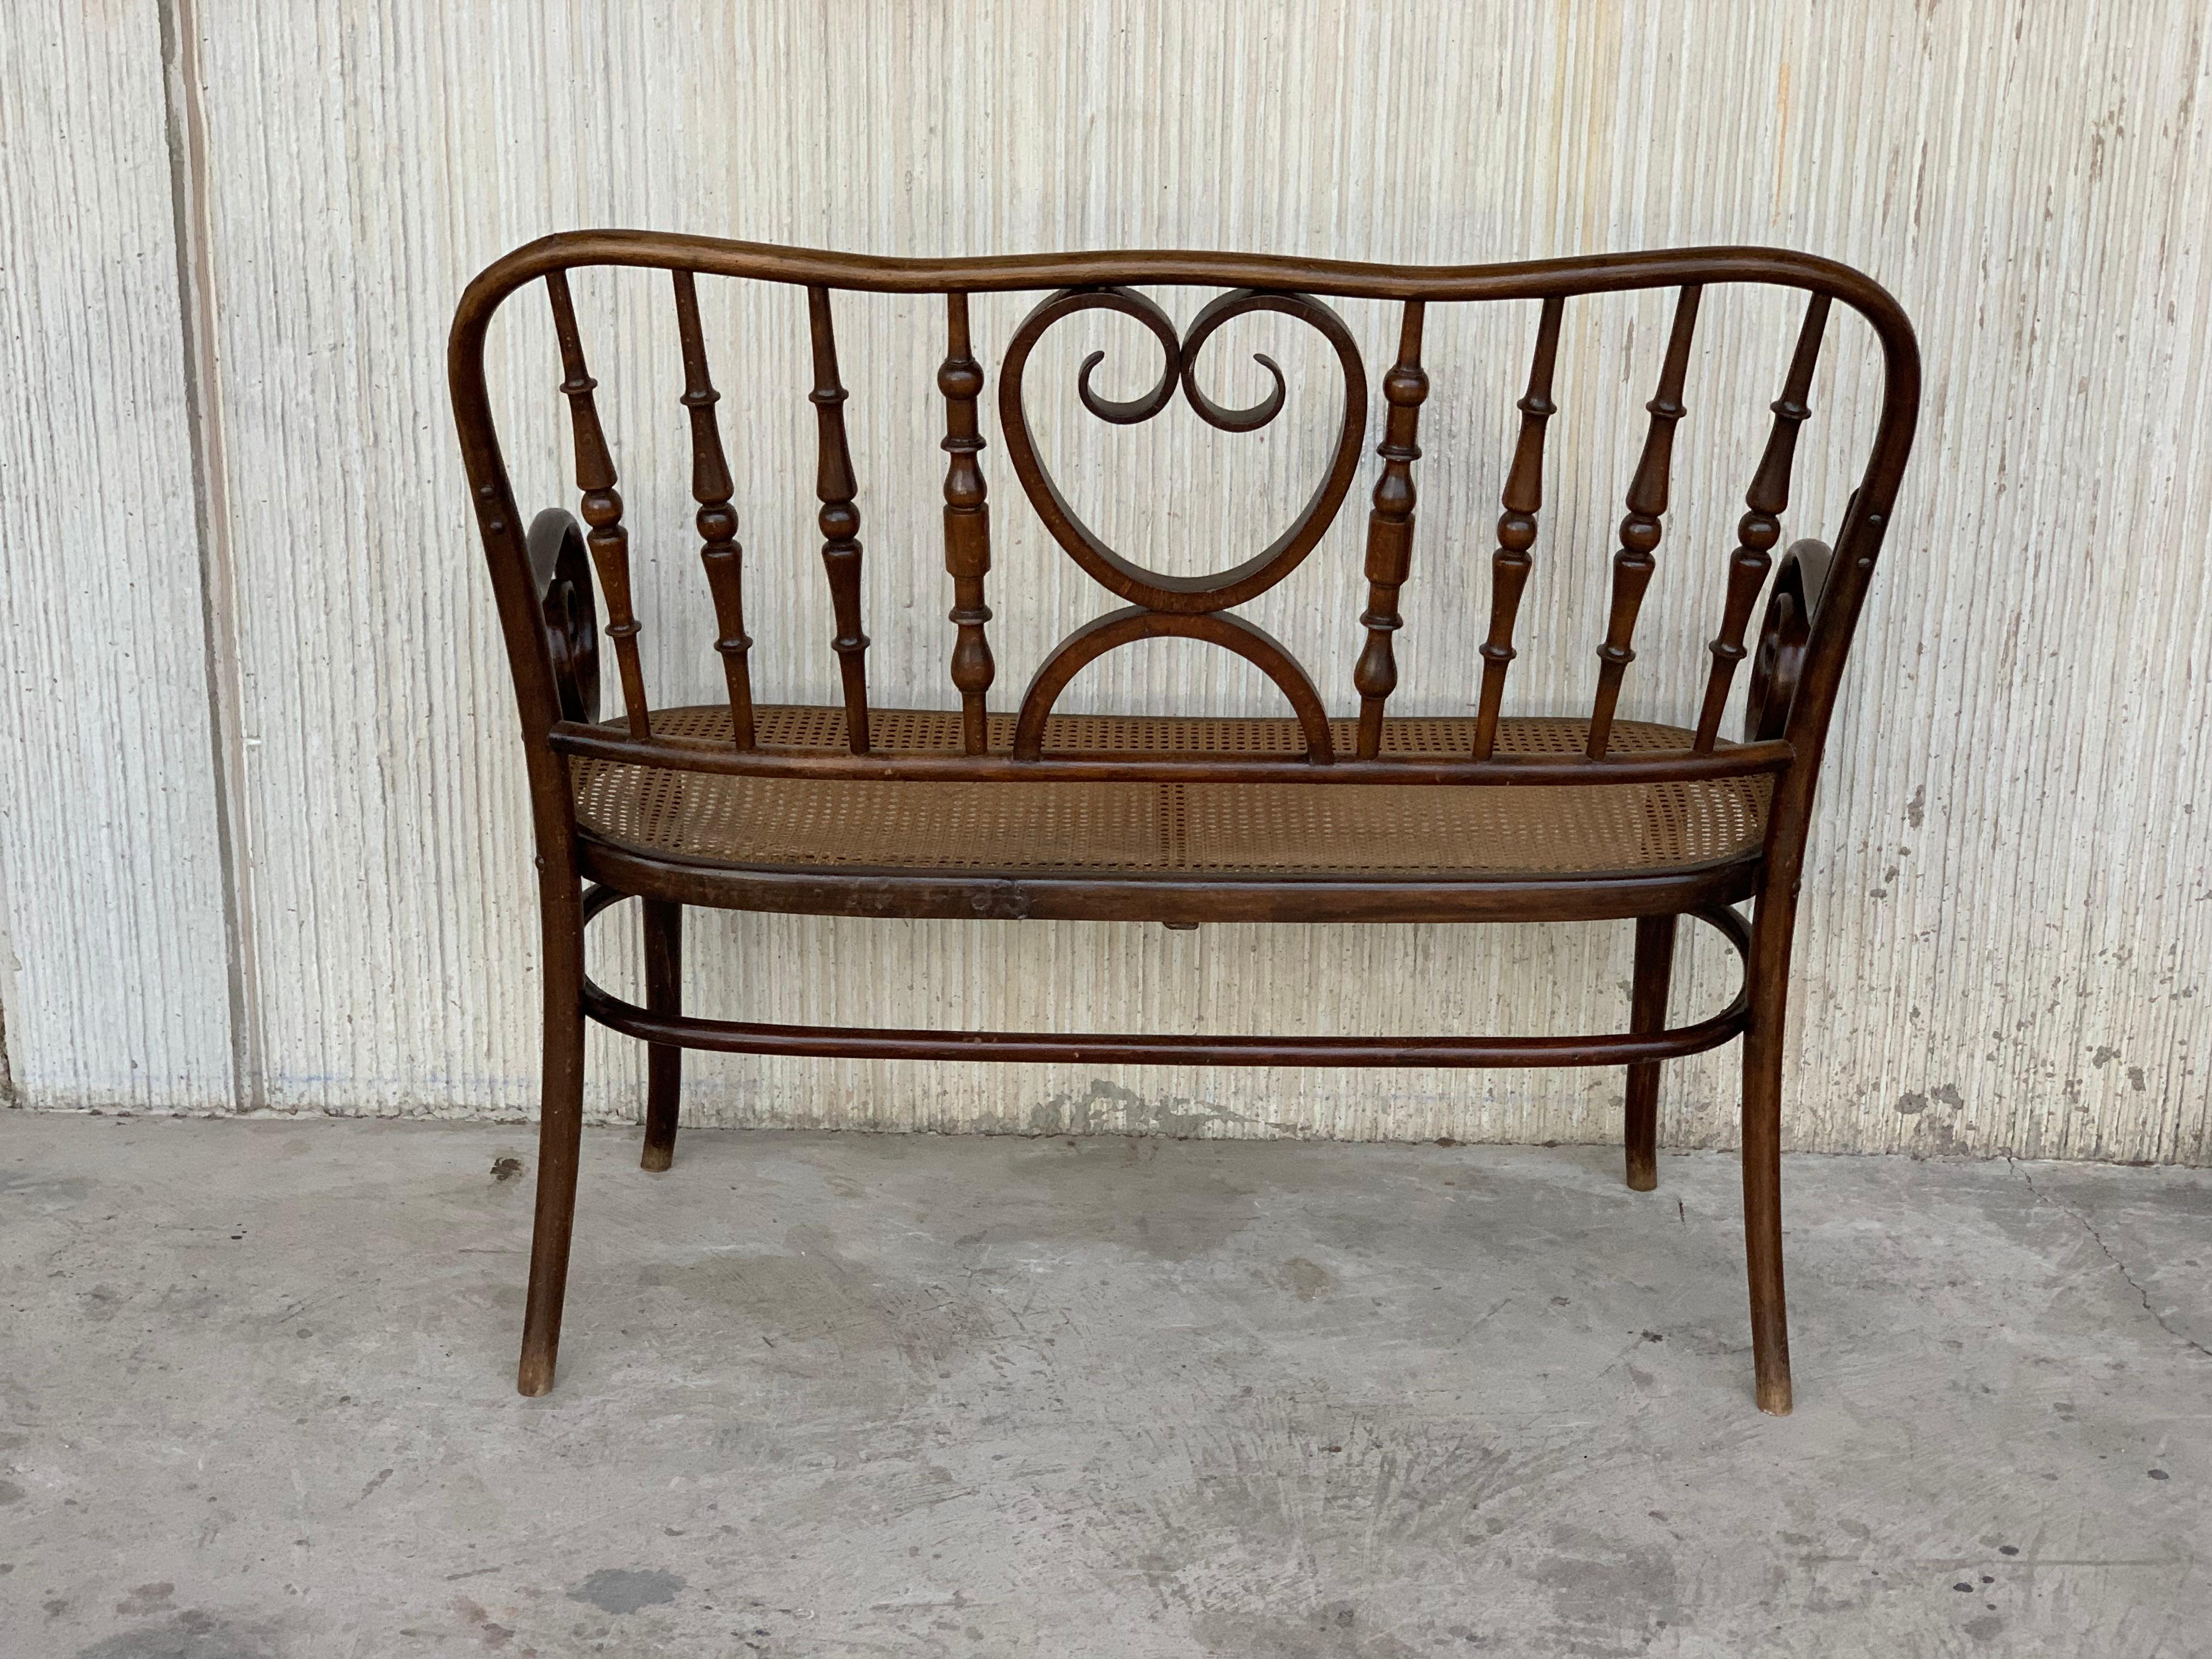 Spanish 20th Century Bentwood Sofa in the Thonet Style, circa 1925, Caned Seat For Sale